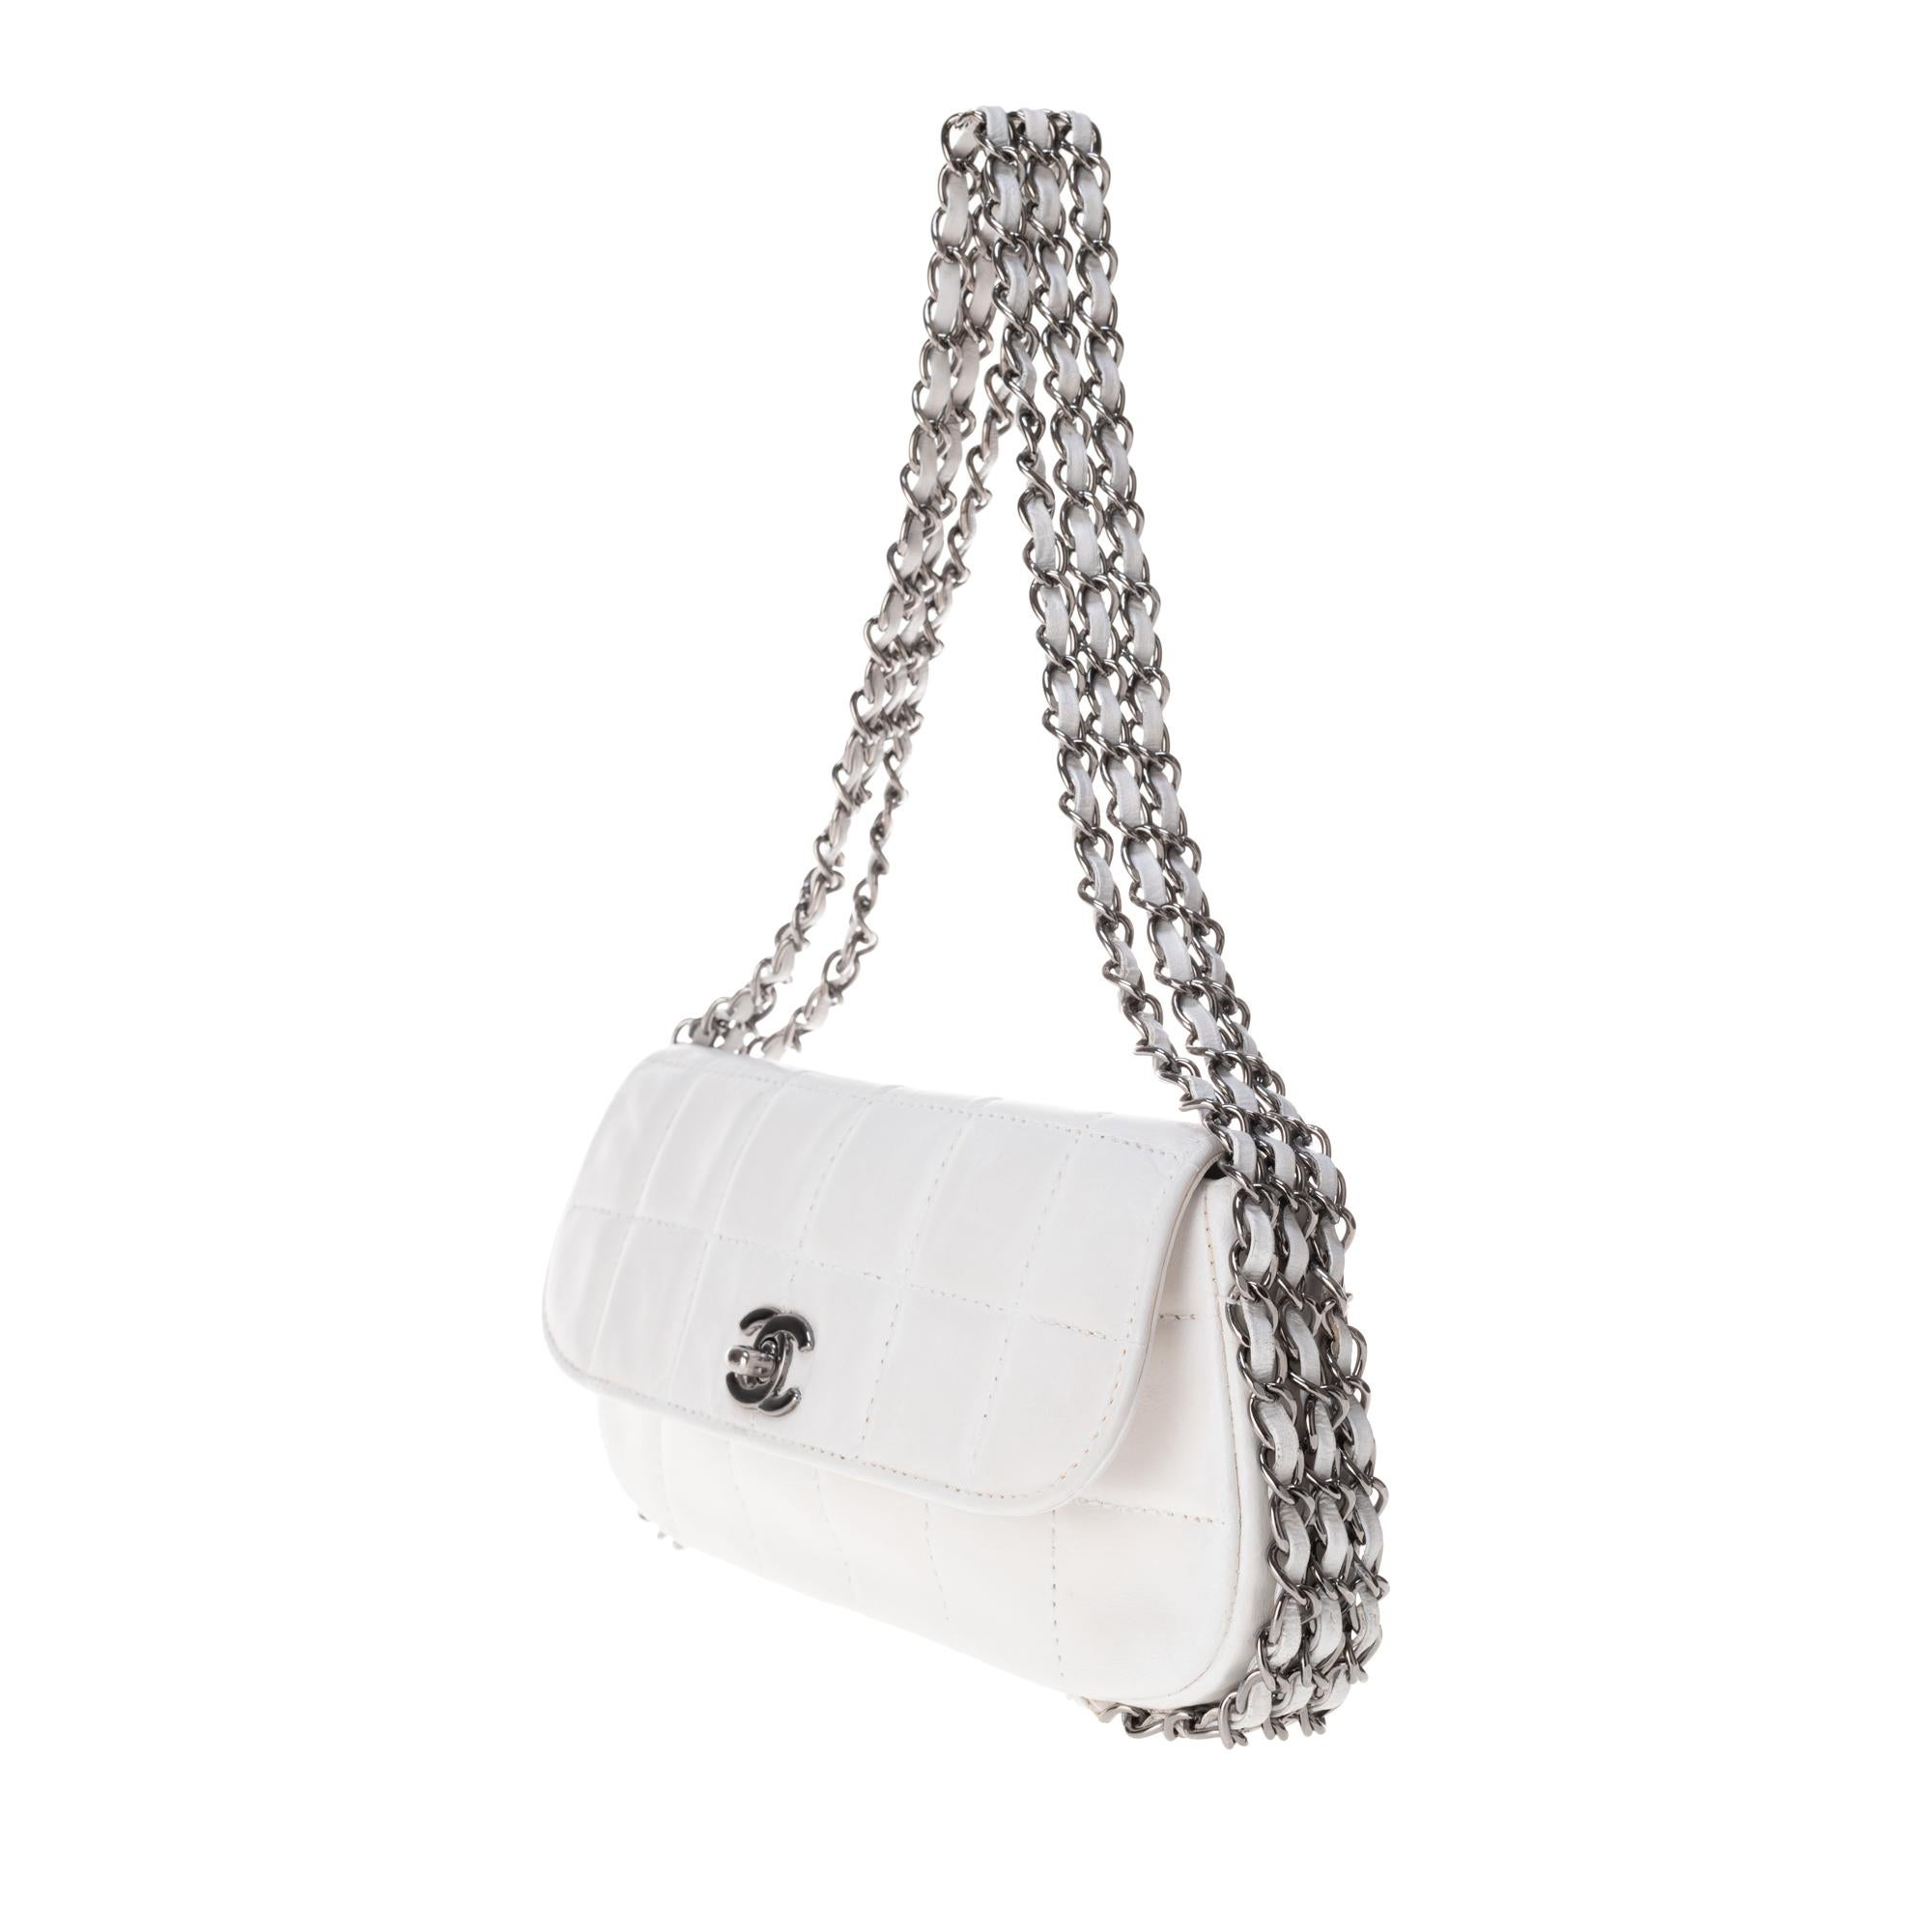 Gray Stunning Chanel Handbag in white quilted lambskin & triple silver chain !